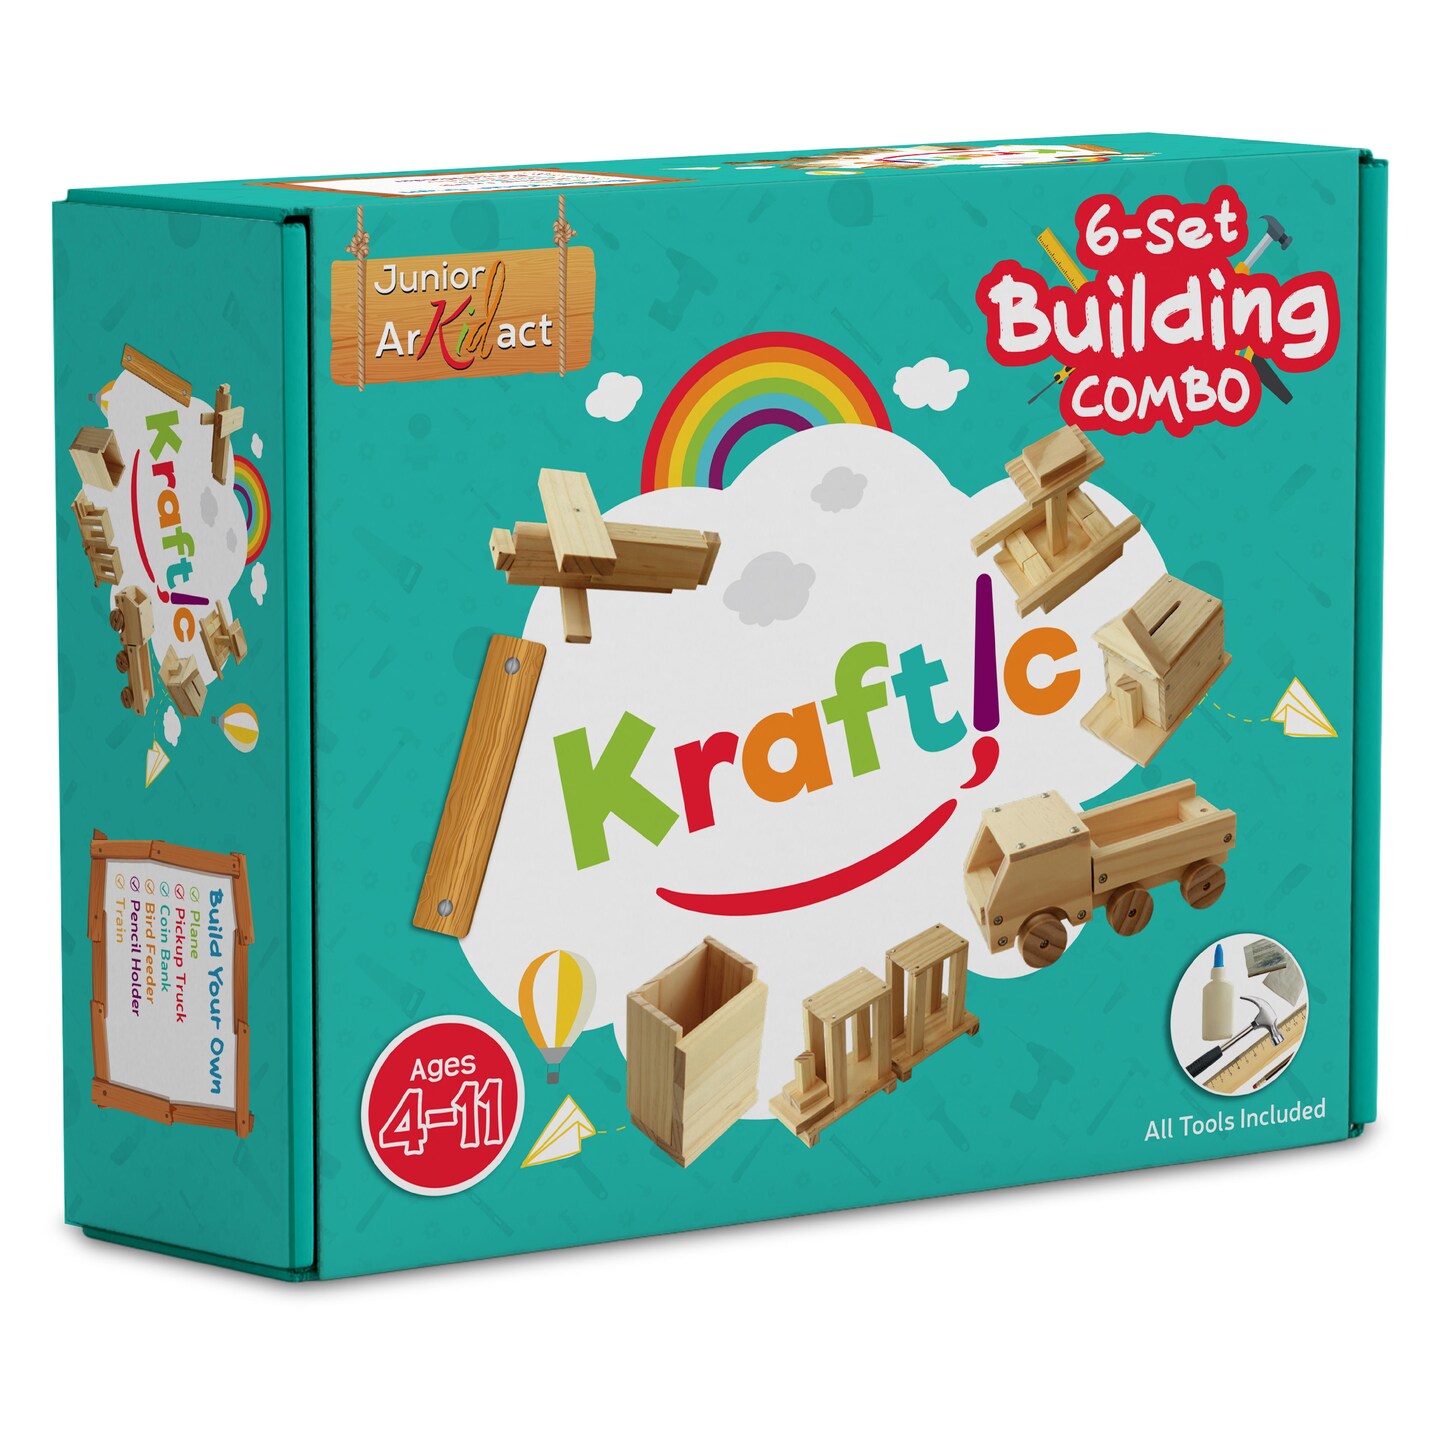 Kraftic Woodworking Building Kit for Kids and Adults, with 2 Educational  DIY Carpentry Construction Wood Model Kit Toy Projects for Boys and Girls 